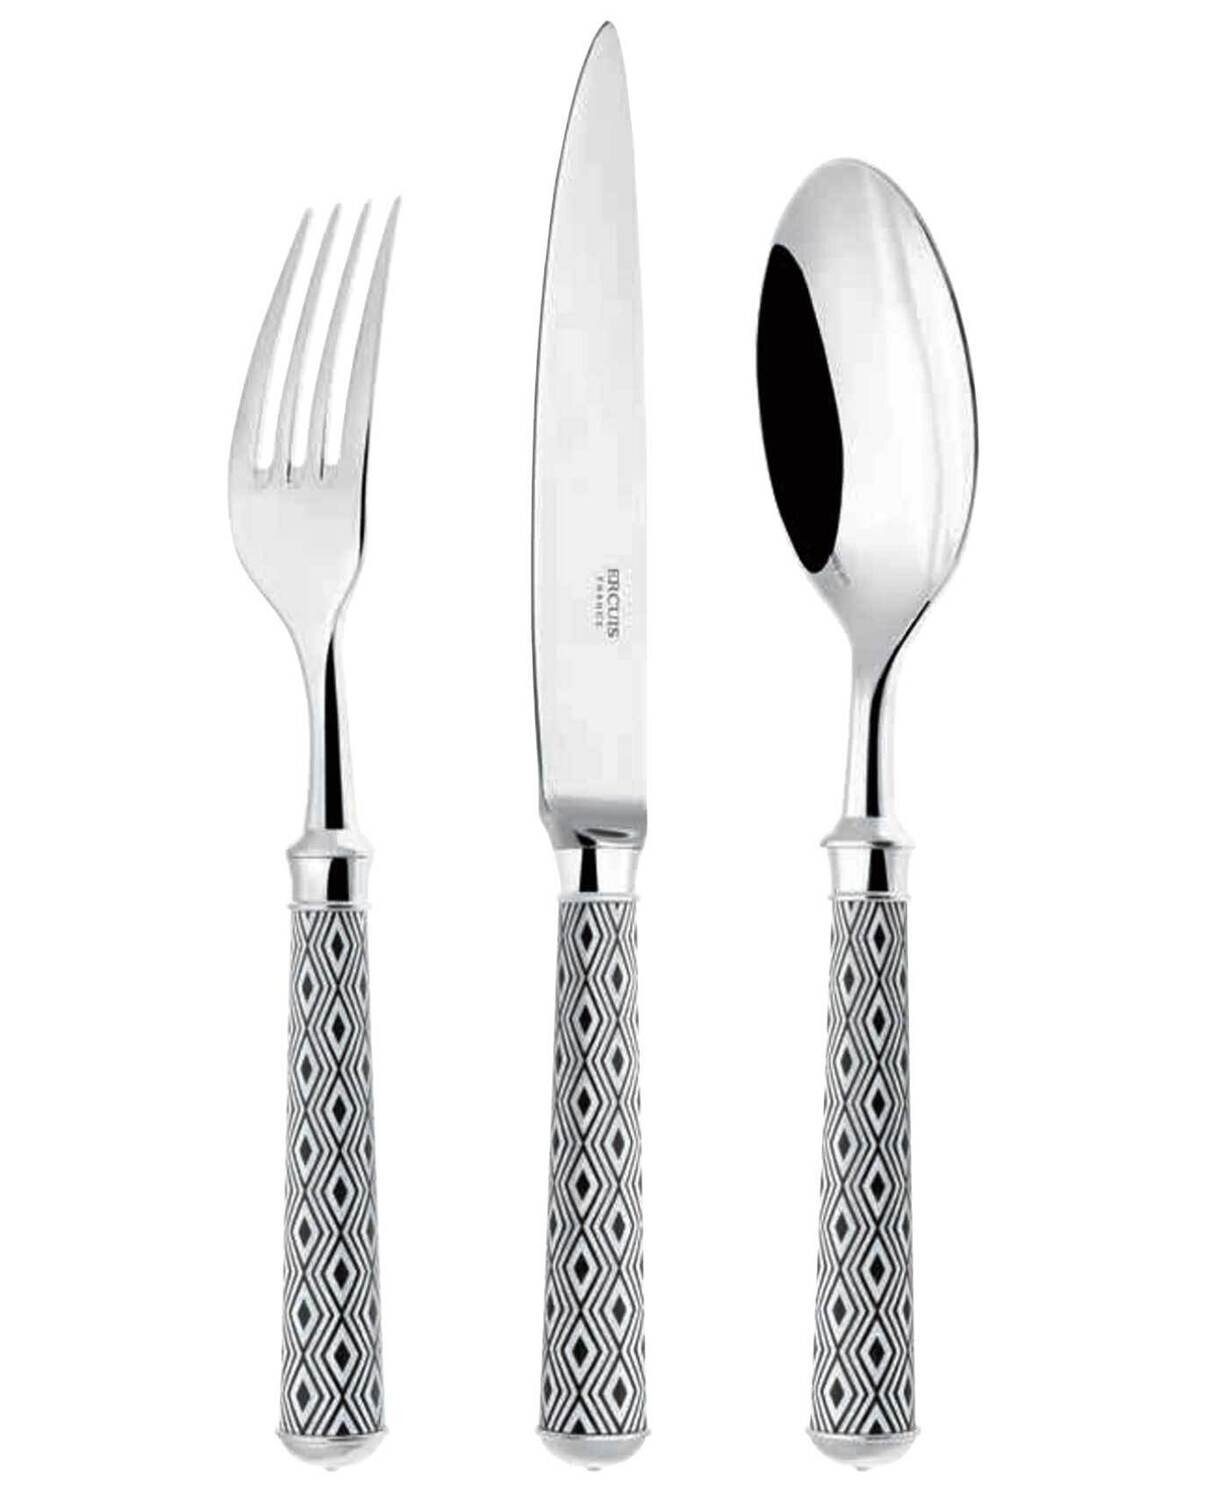 Ercuis Arlequin Tree Fish Fork 7.625 Inch Silver Plated F60054P-07